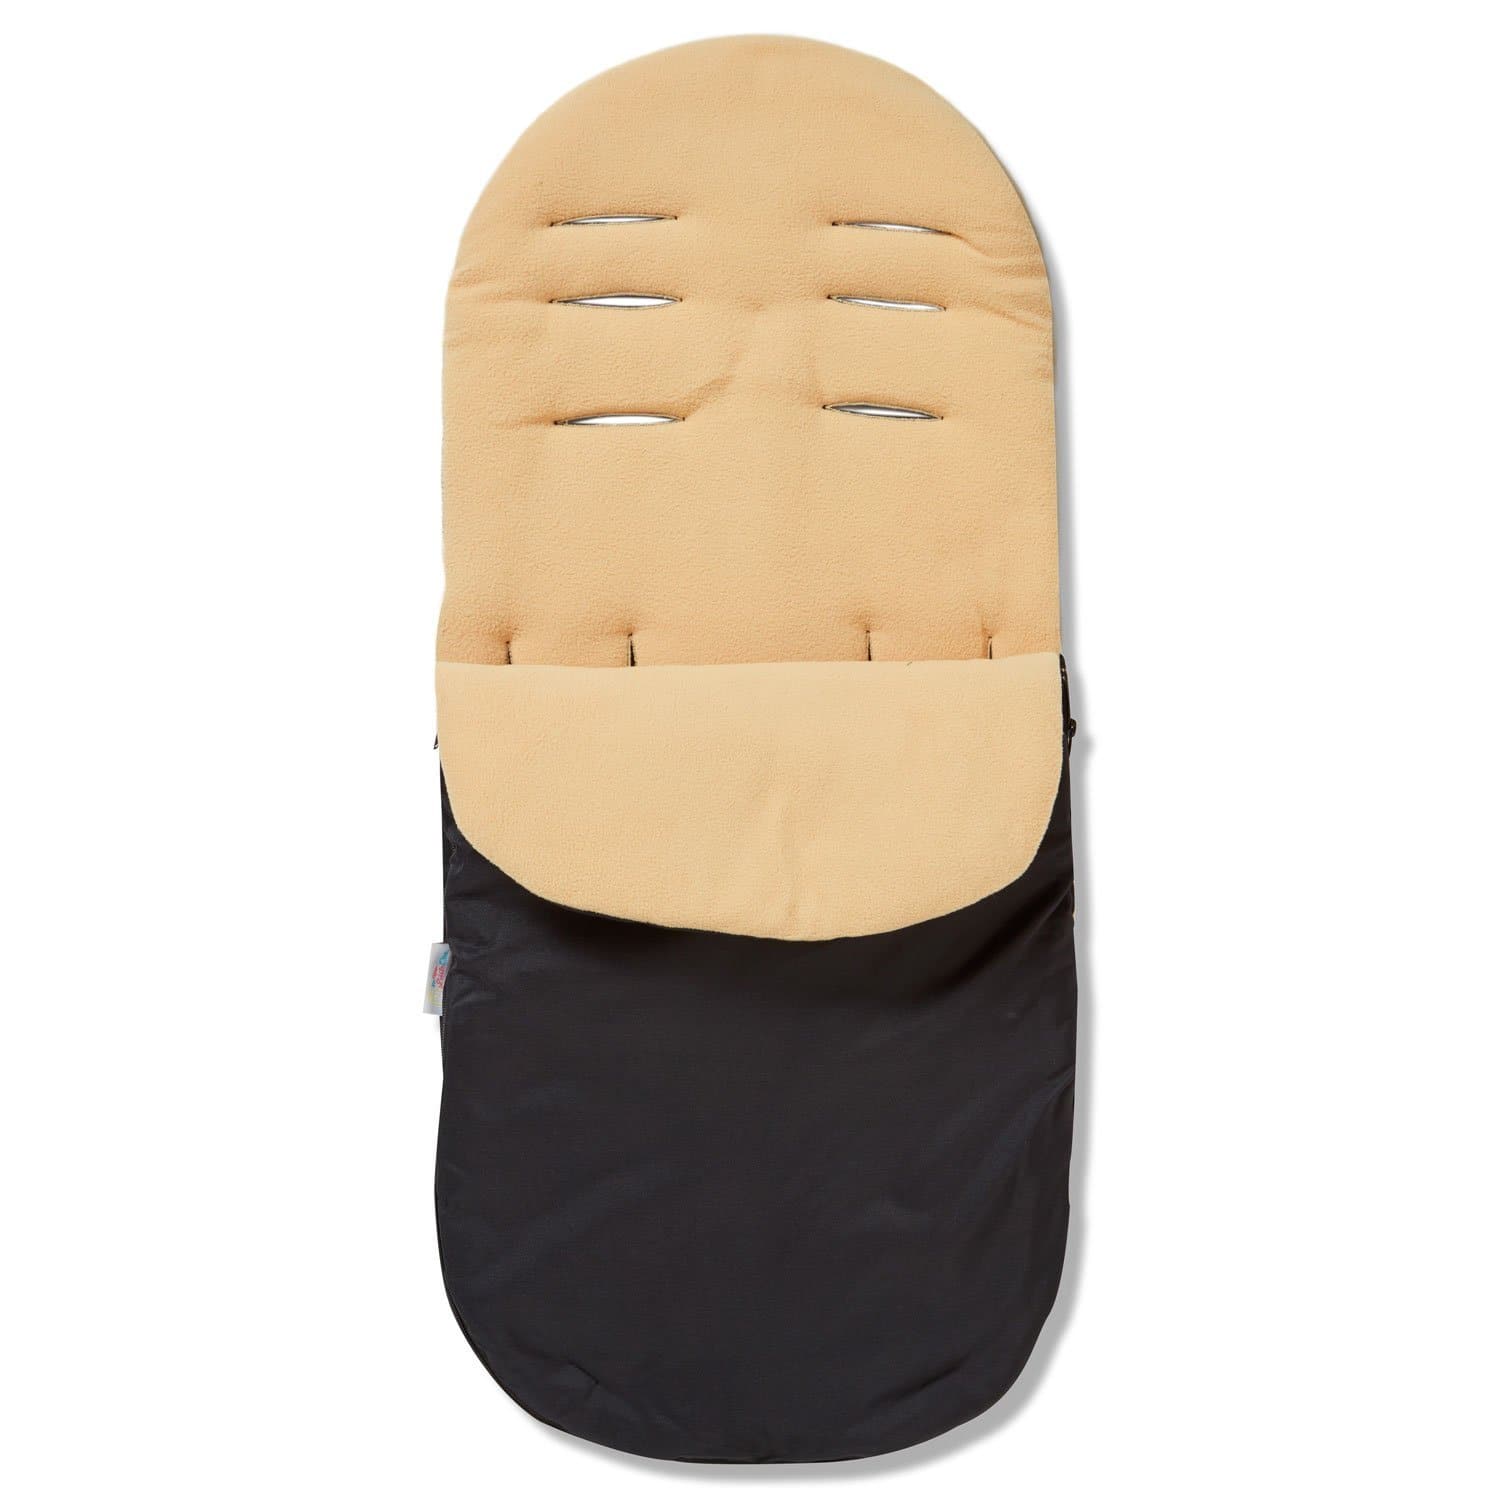 Footmuff / Cosy Toes Compatible with BabyDan - Sand / Fits All Models | For Your Little One